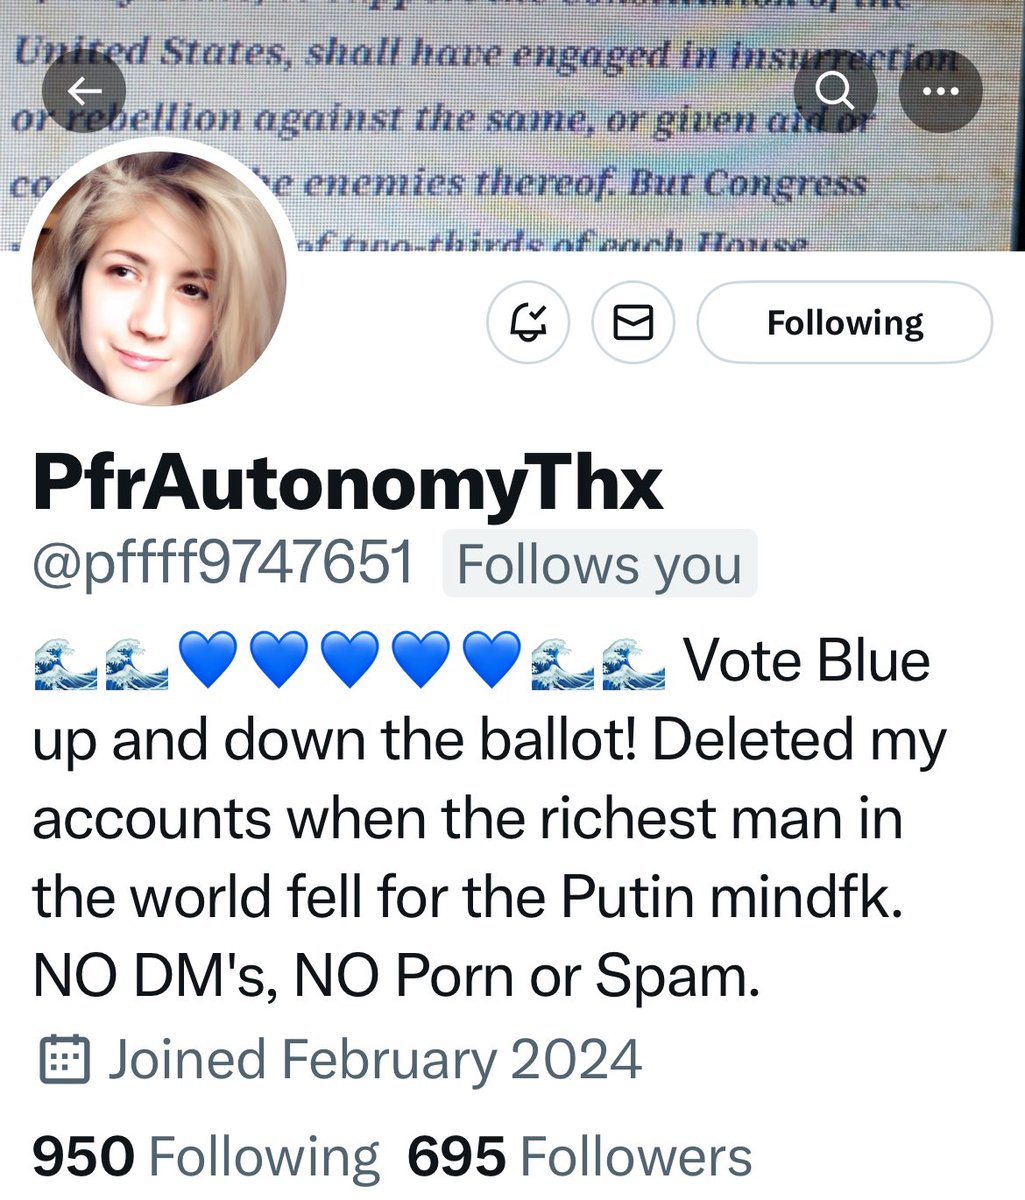 💙Give her a 👣 Follow 👣@pffff9747651 She's jumping back in the ring to fight for women's rights and to save democracy. Let's help her get to 2K 💙 Stronger Together 💙 #DemValues #NoDemUnder1k